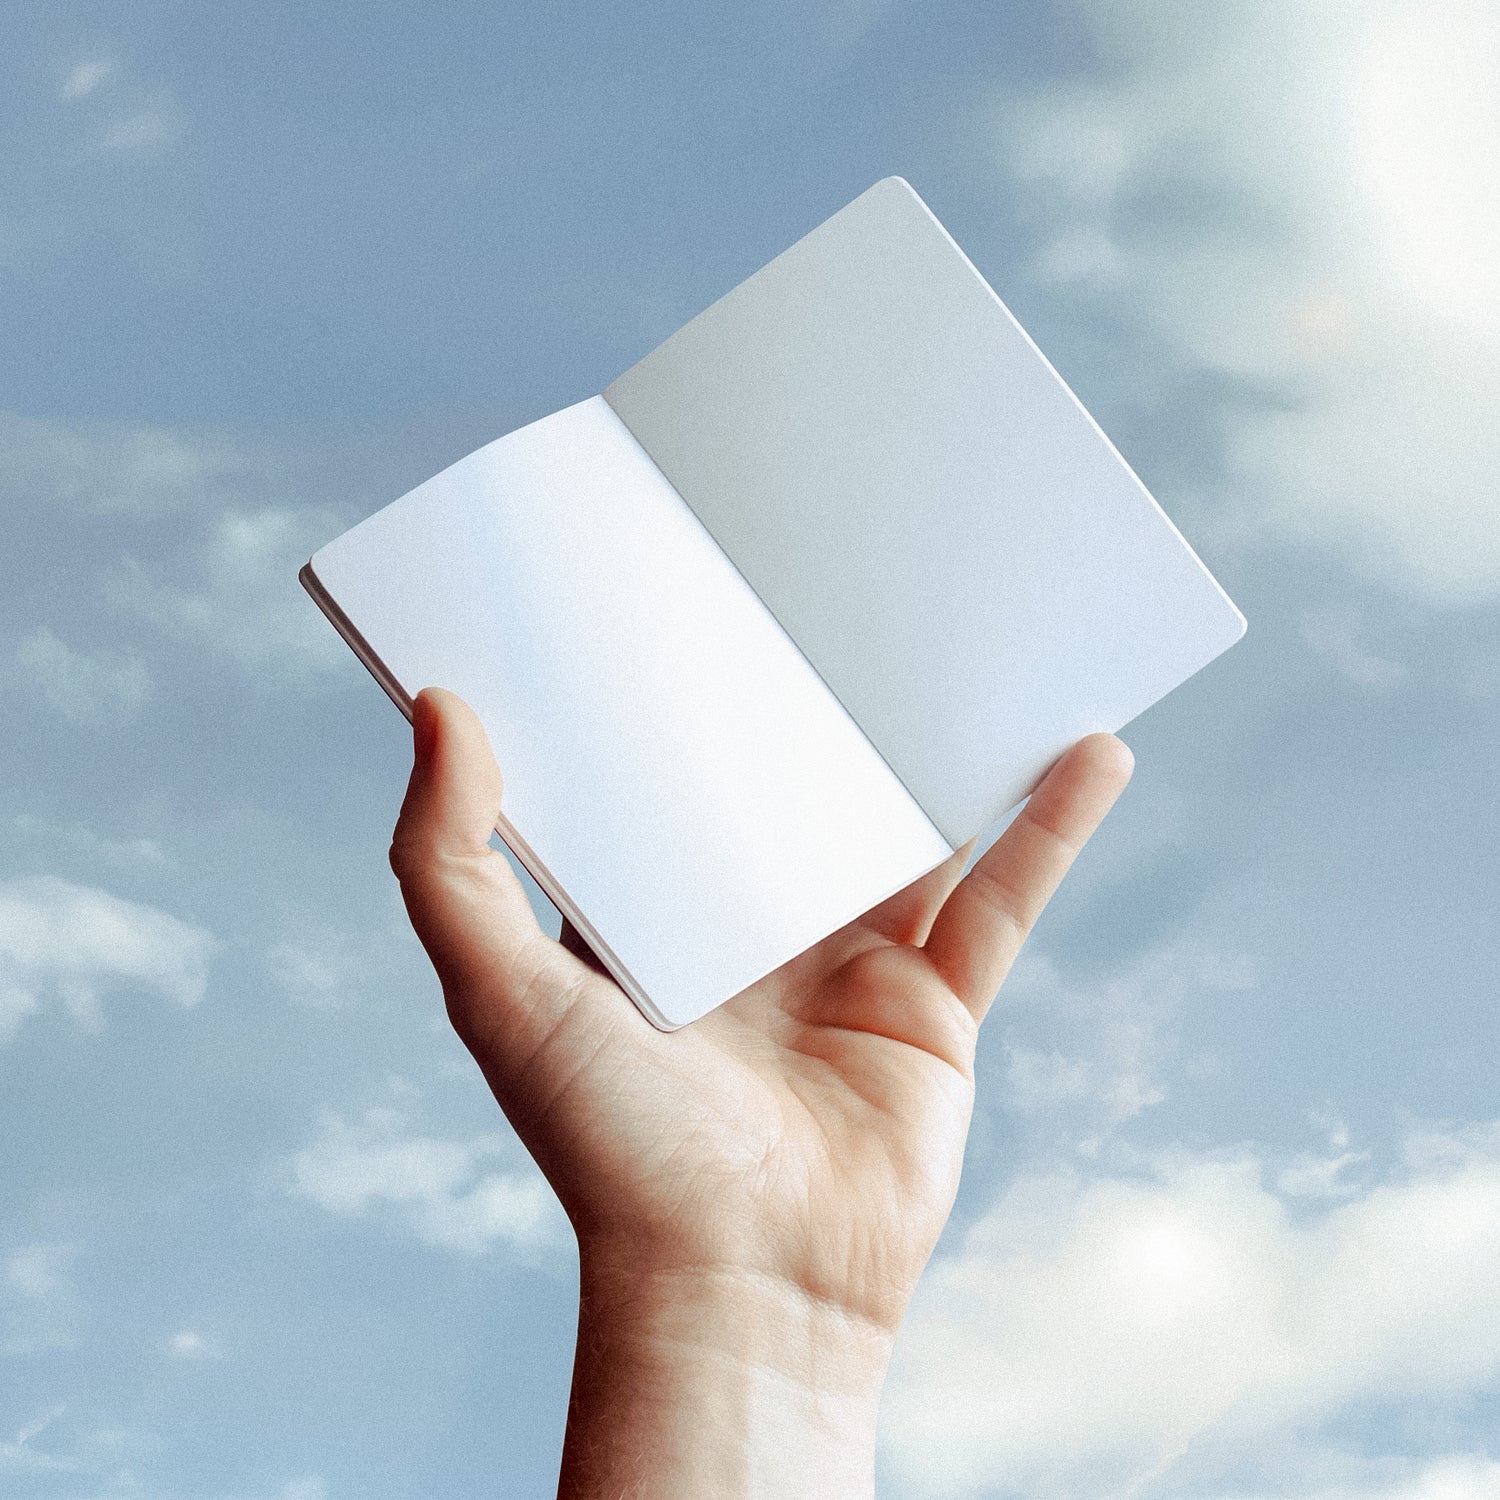 A hand holds a pocket notebook up against a partly cloudy sky, light blue and sunny.